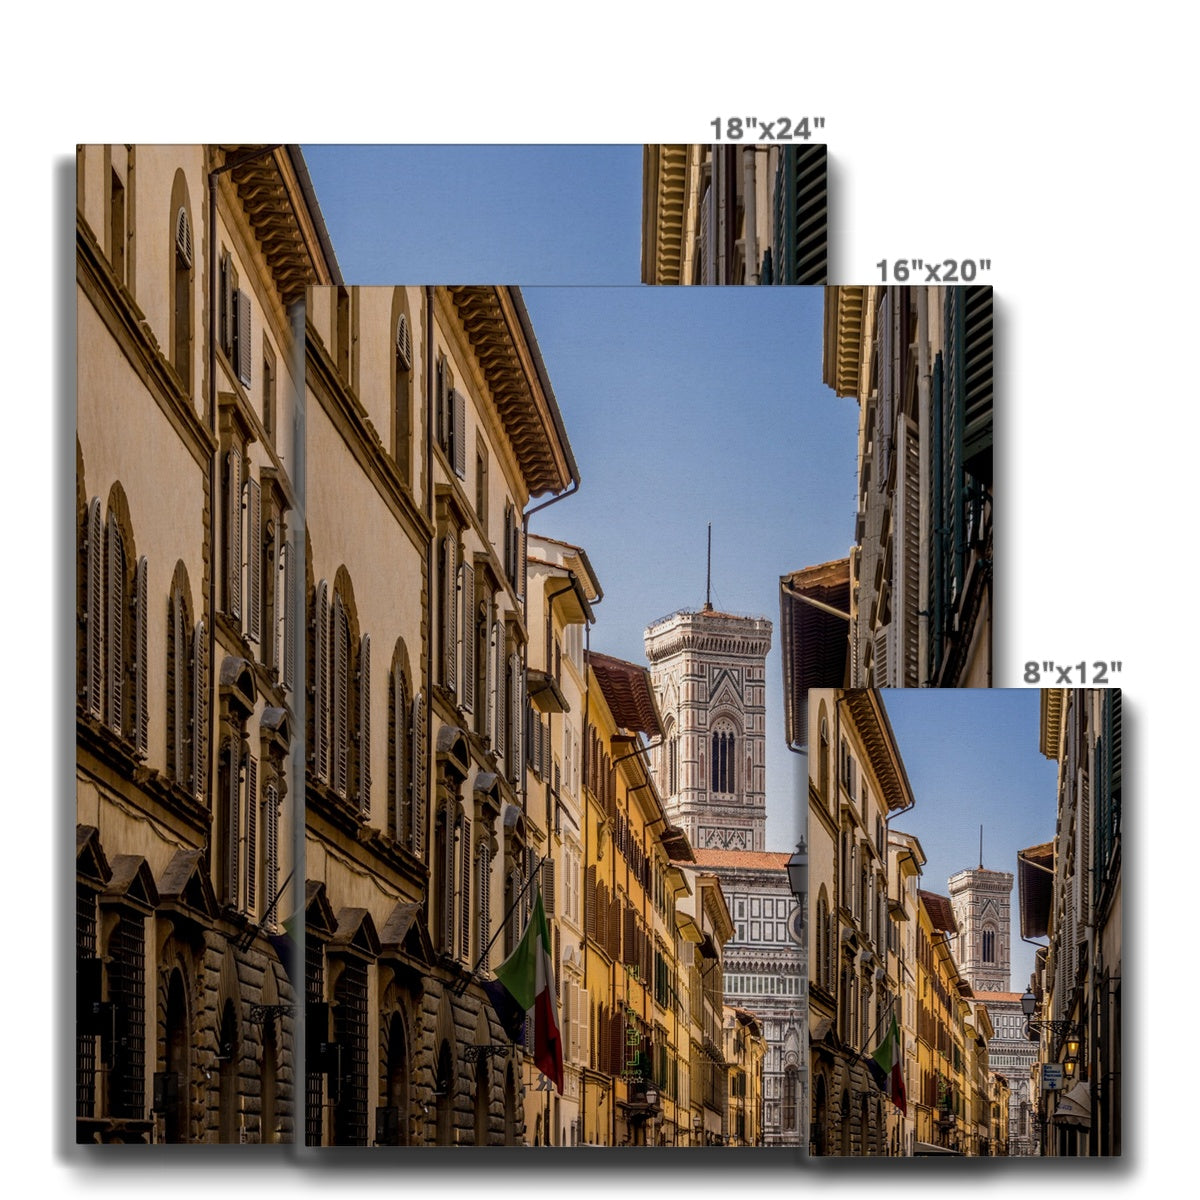 Giotto's Campanile glimpsed between buildings in the city of Florence, Italy. Canvas